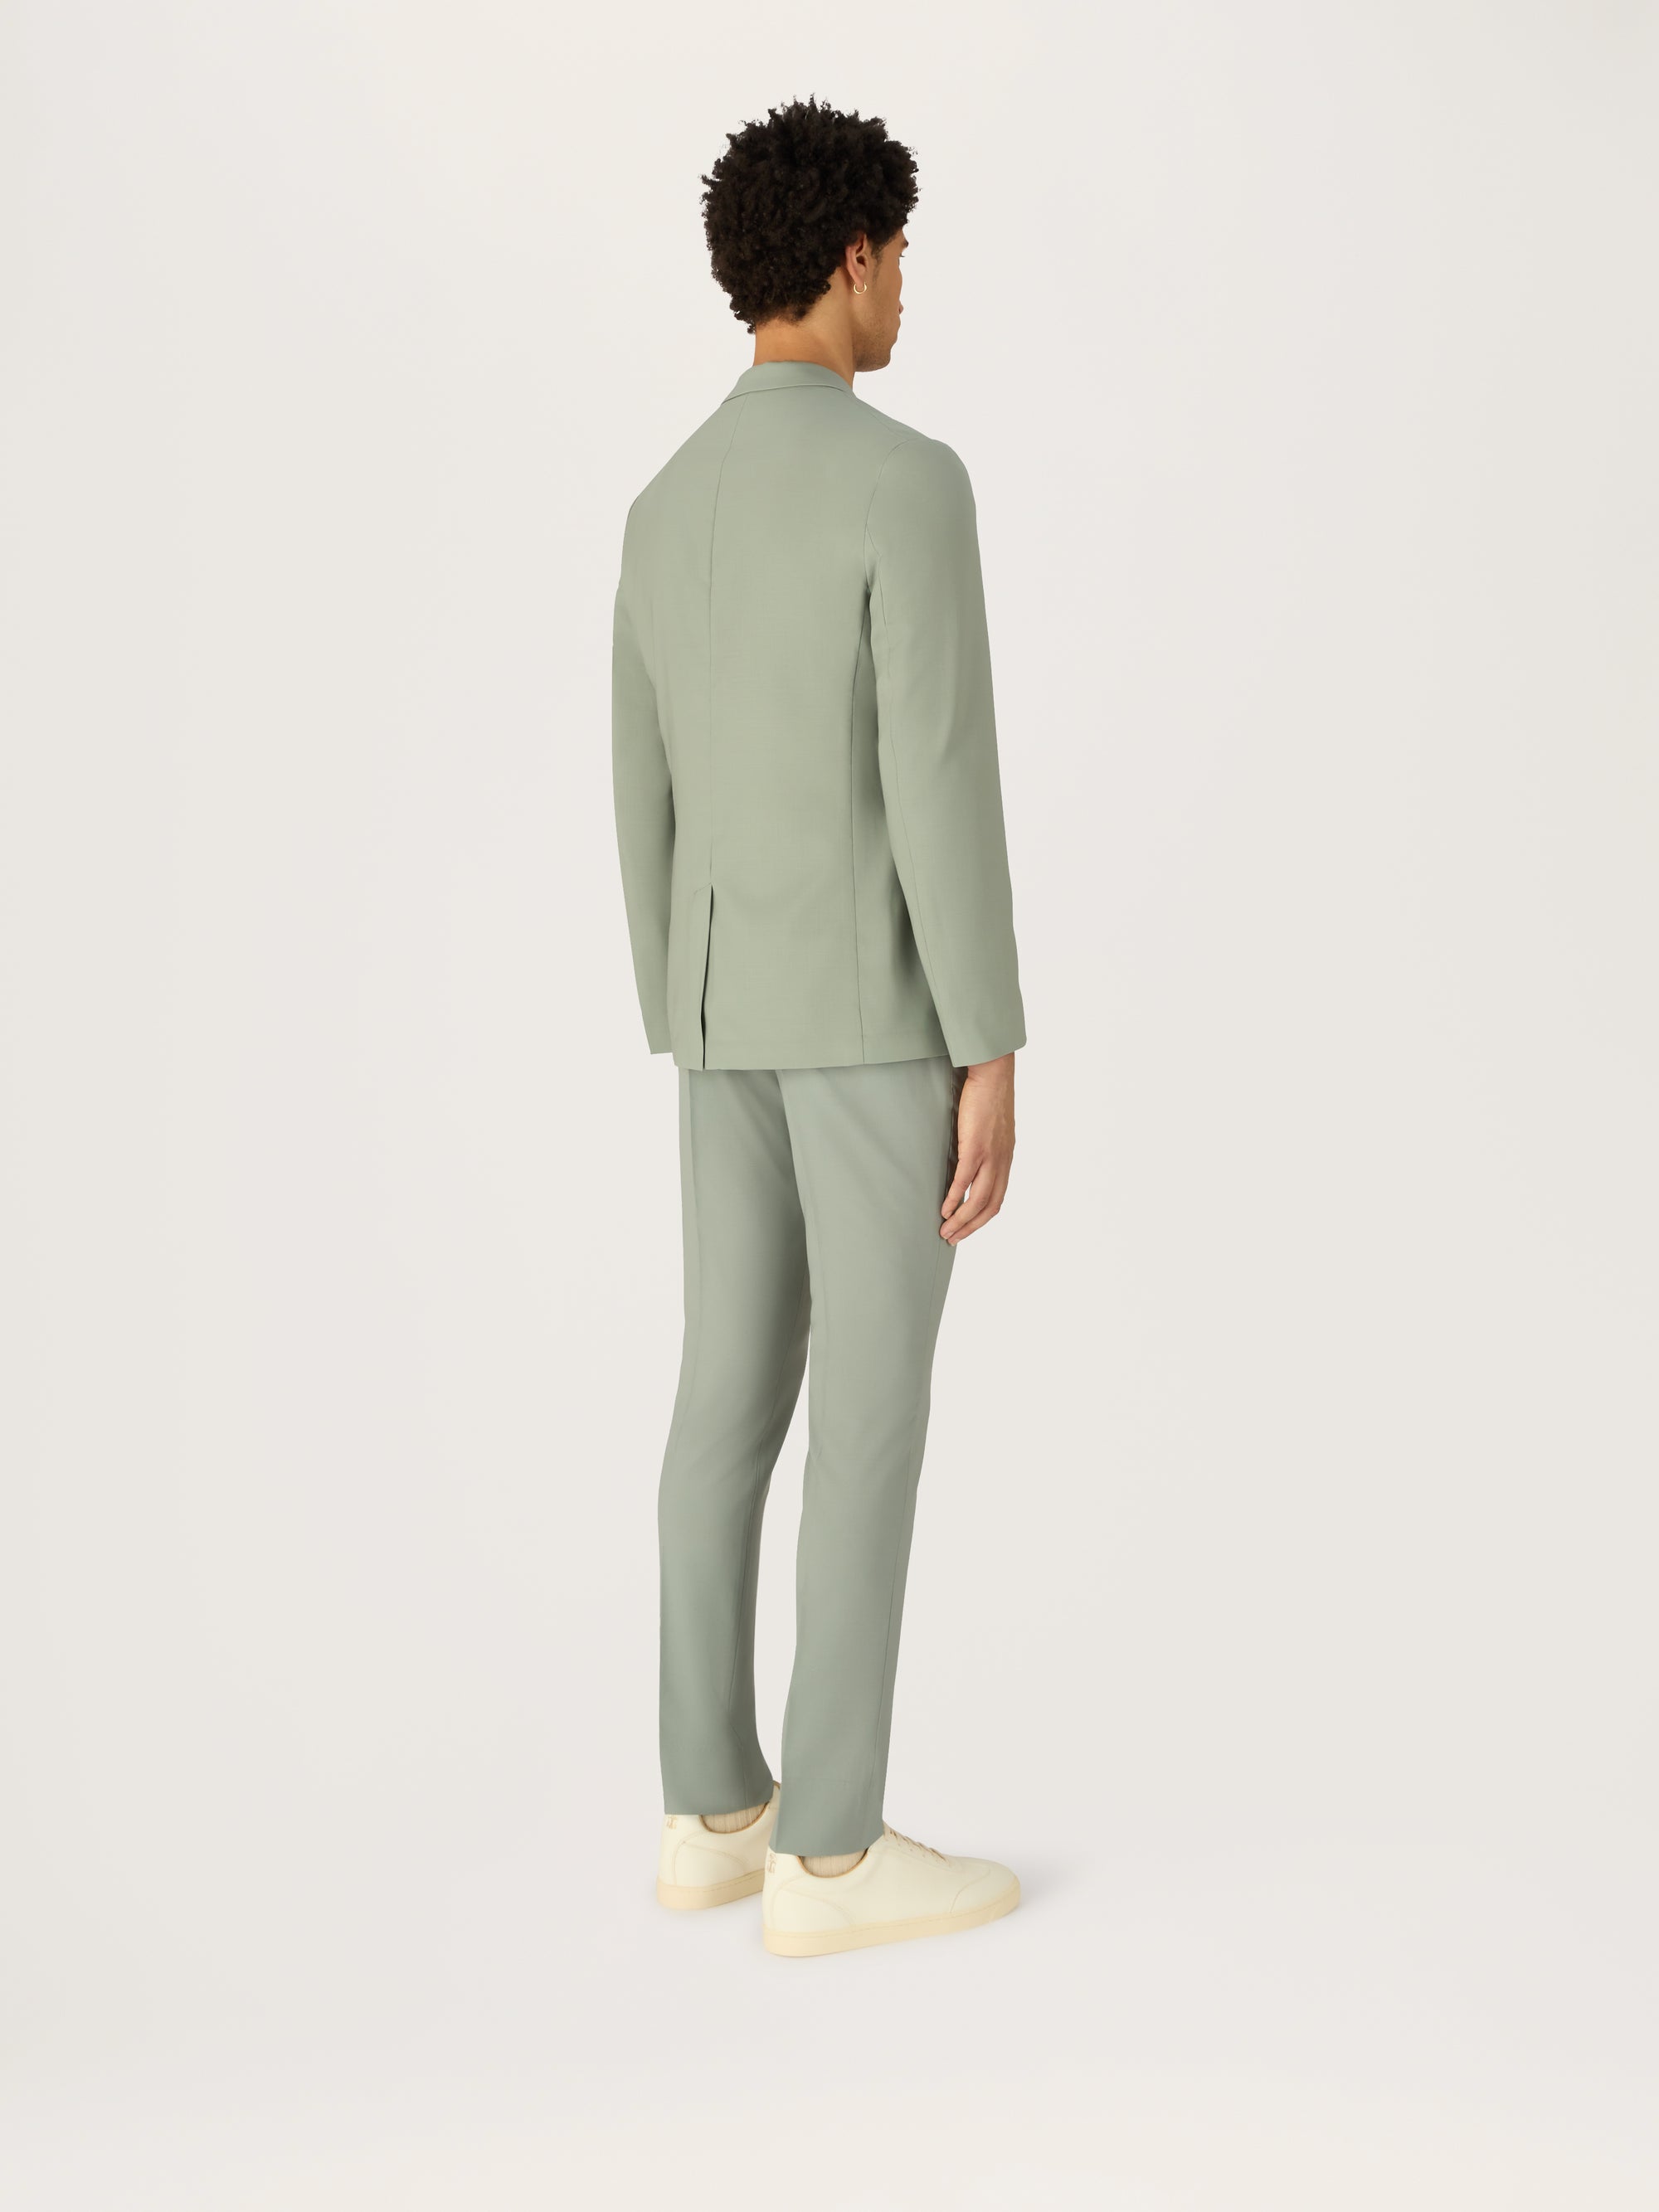 The Sage Tropical Wool Suit